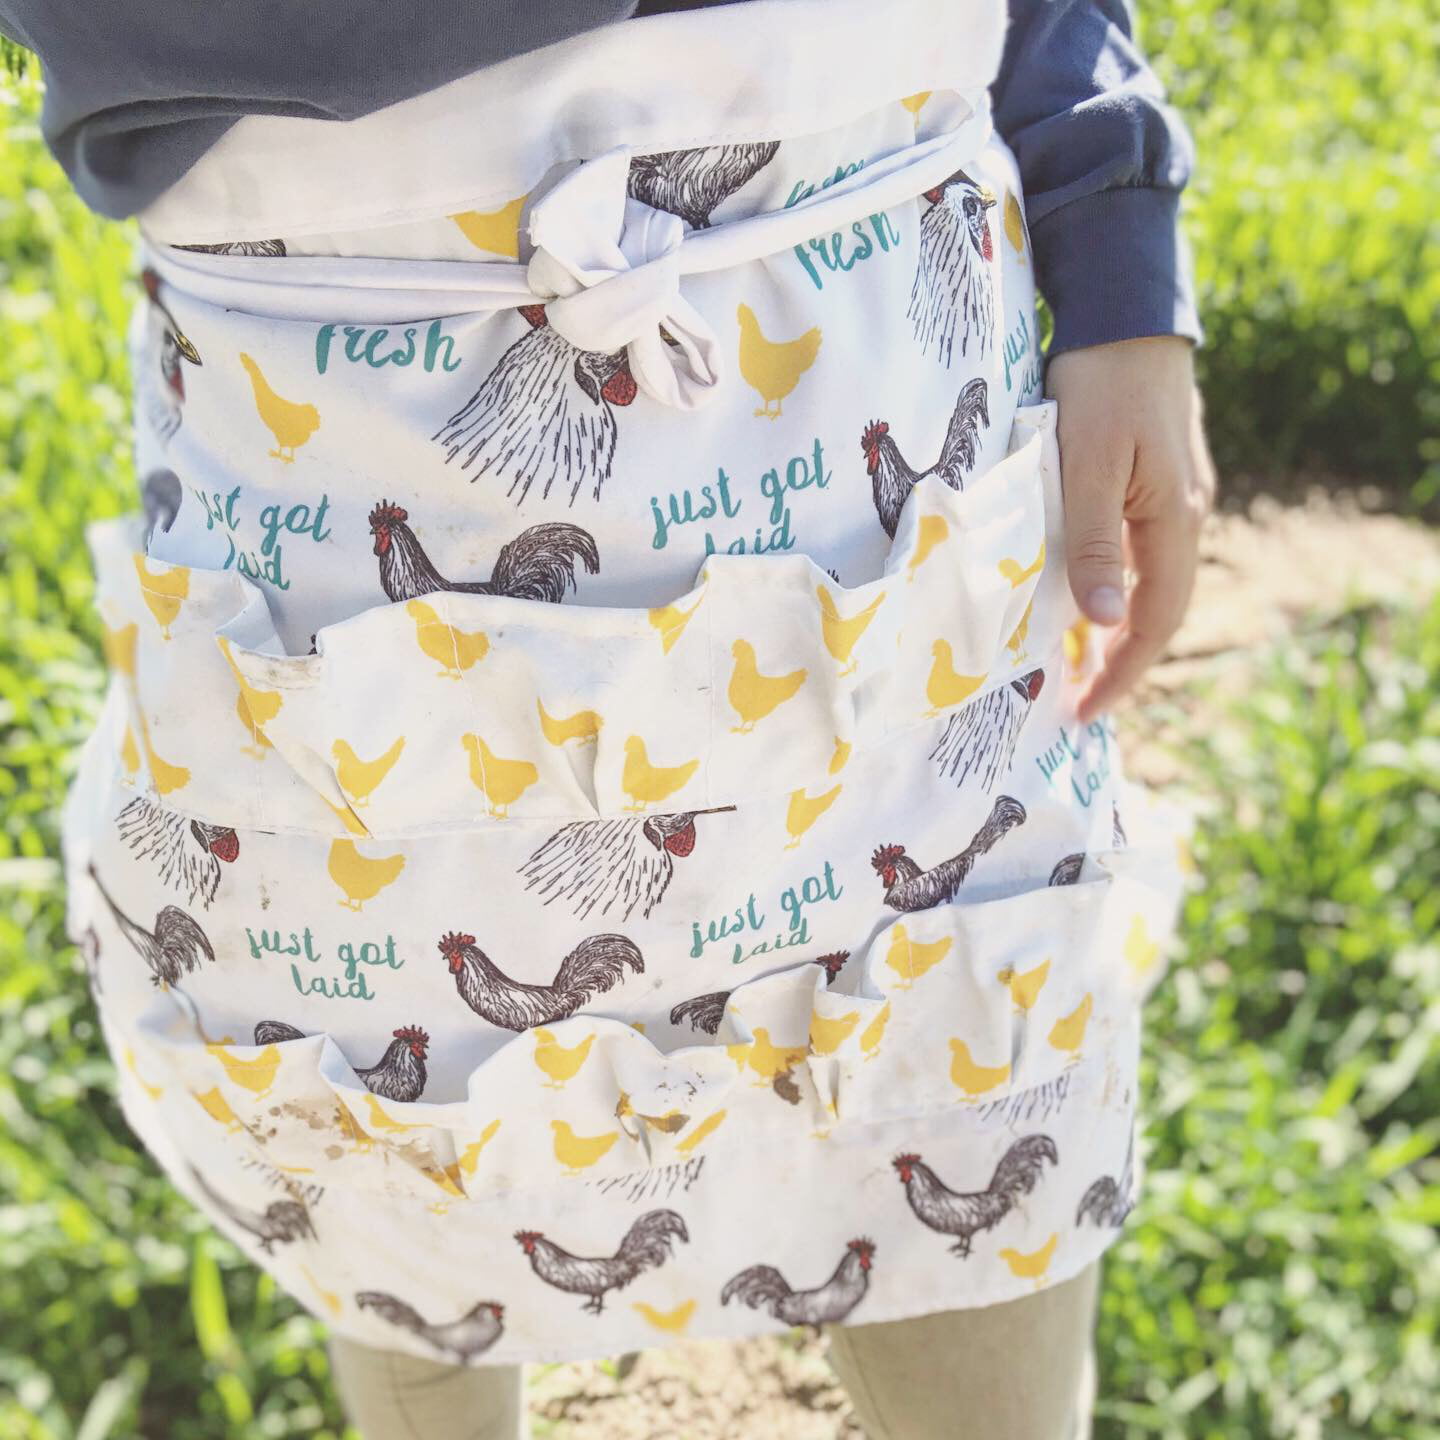 Today I made an #egg apron for collecting eggs. #homestead #eggapron #